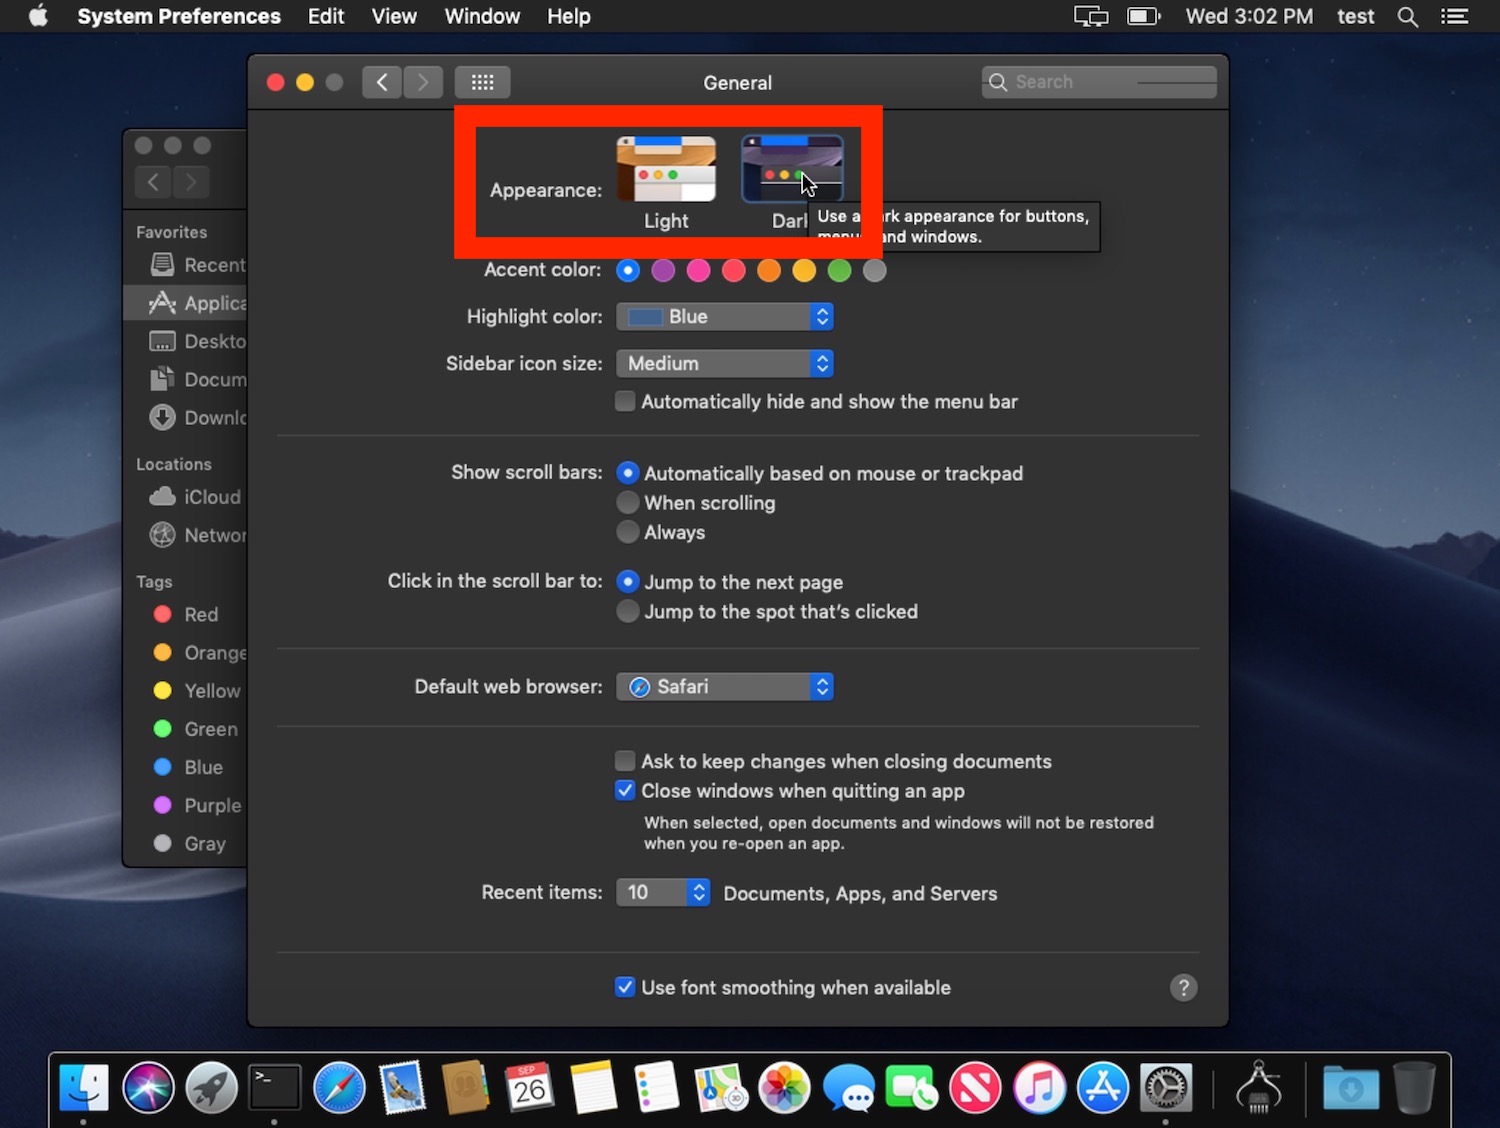 How To Enable Dark Mode On Macos Mojave Osxdaily